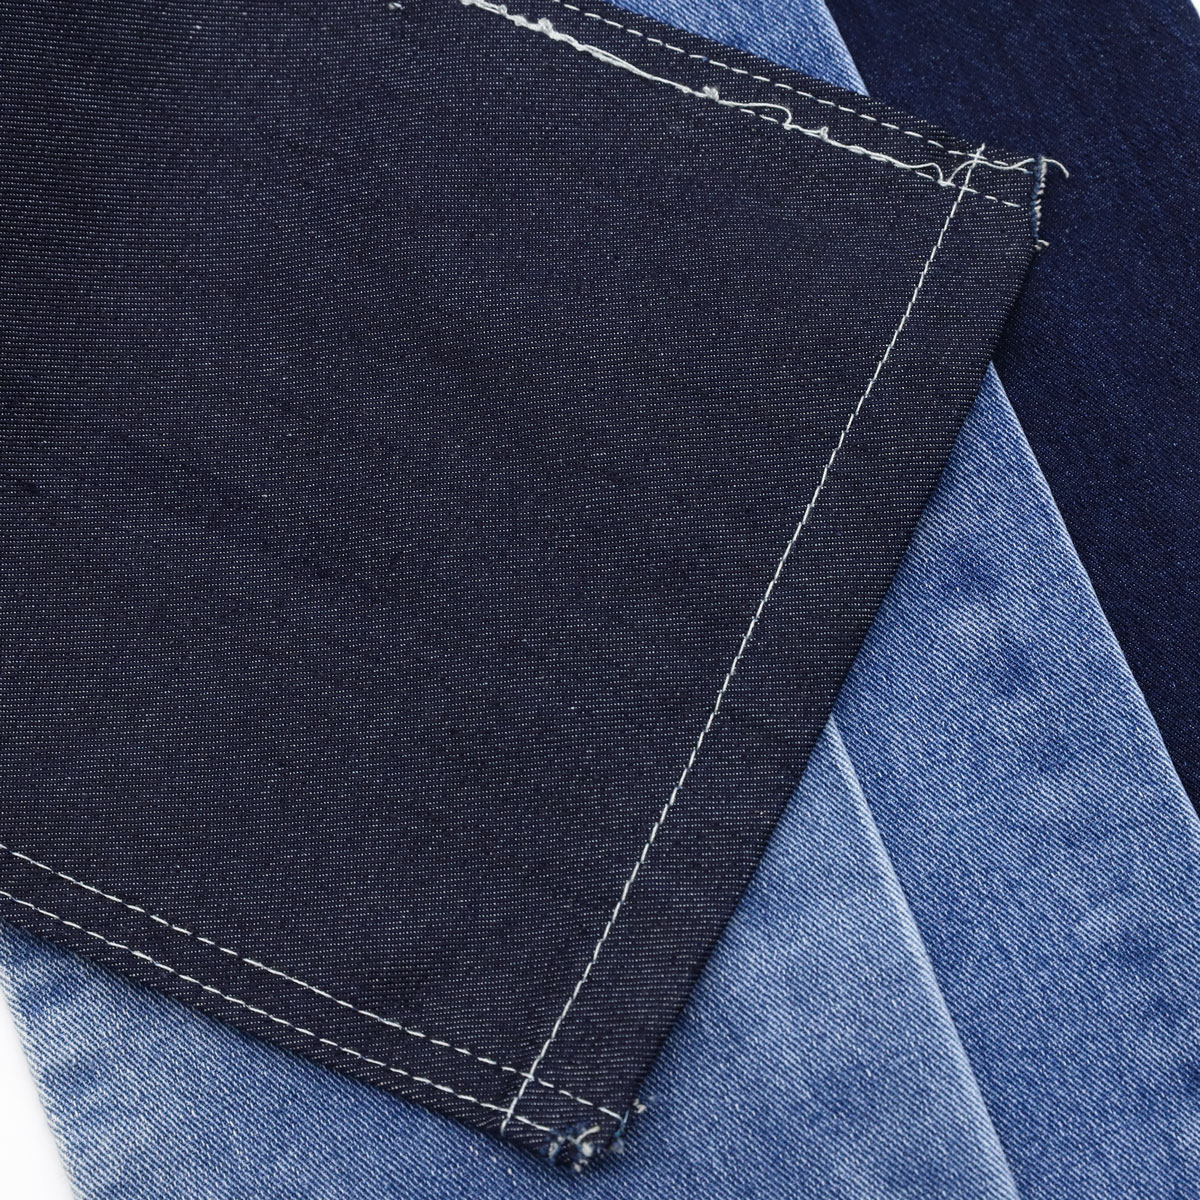 A Look Behind the Advantages of a Stretch Denim Material 1